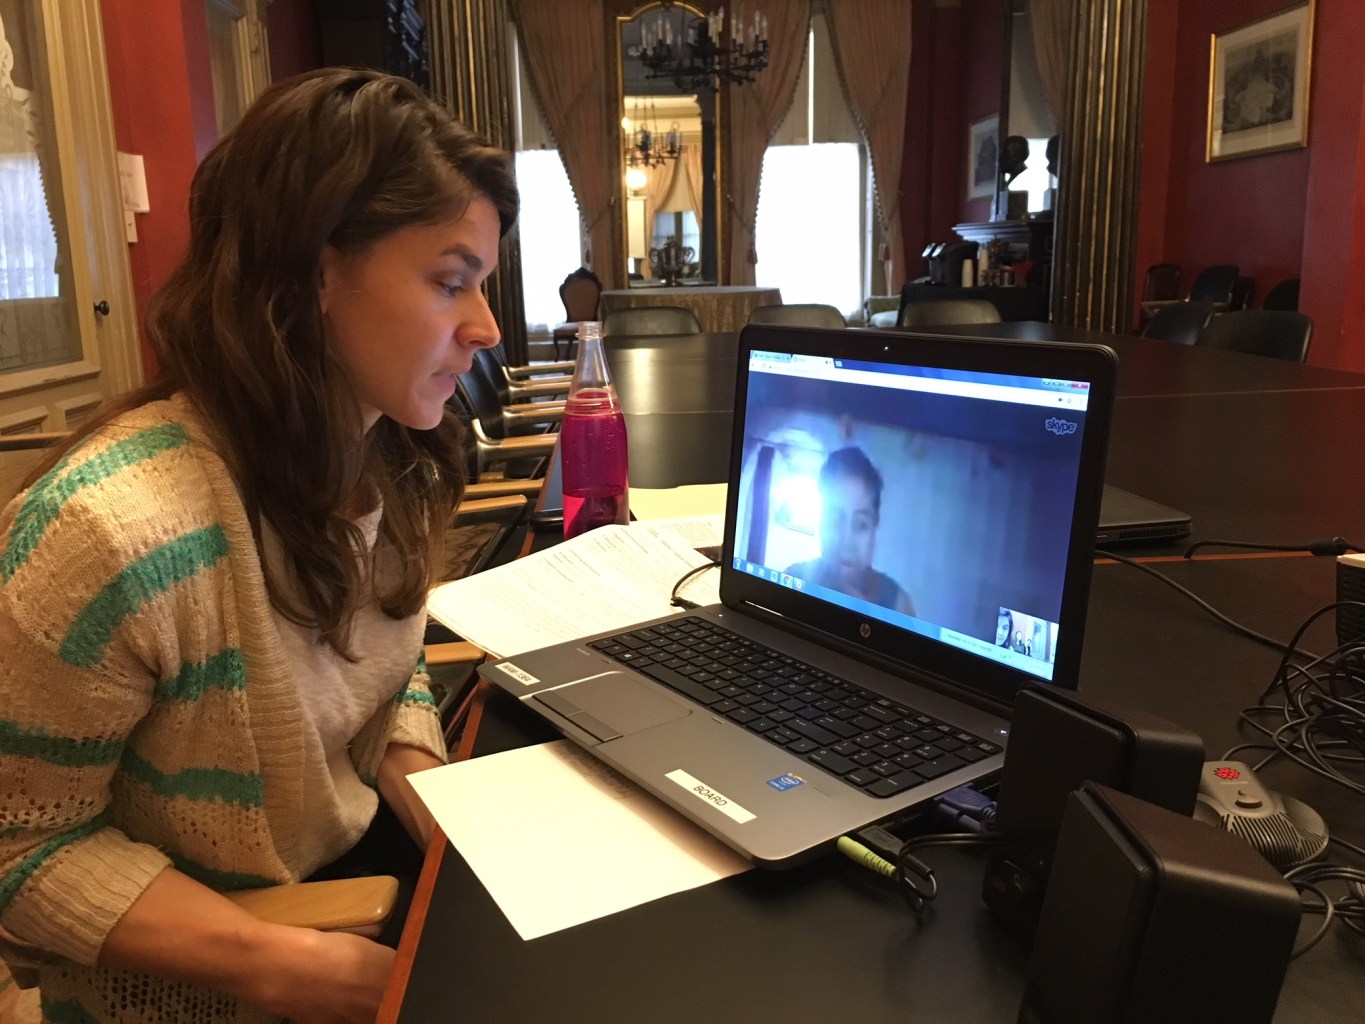 Susan sits in front of a laptop where Tsiroy is visible on a video chat screen.